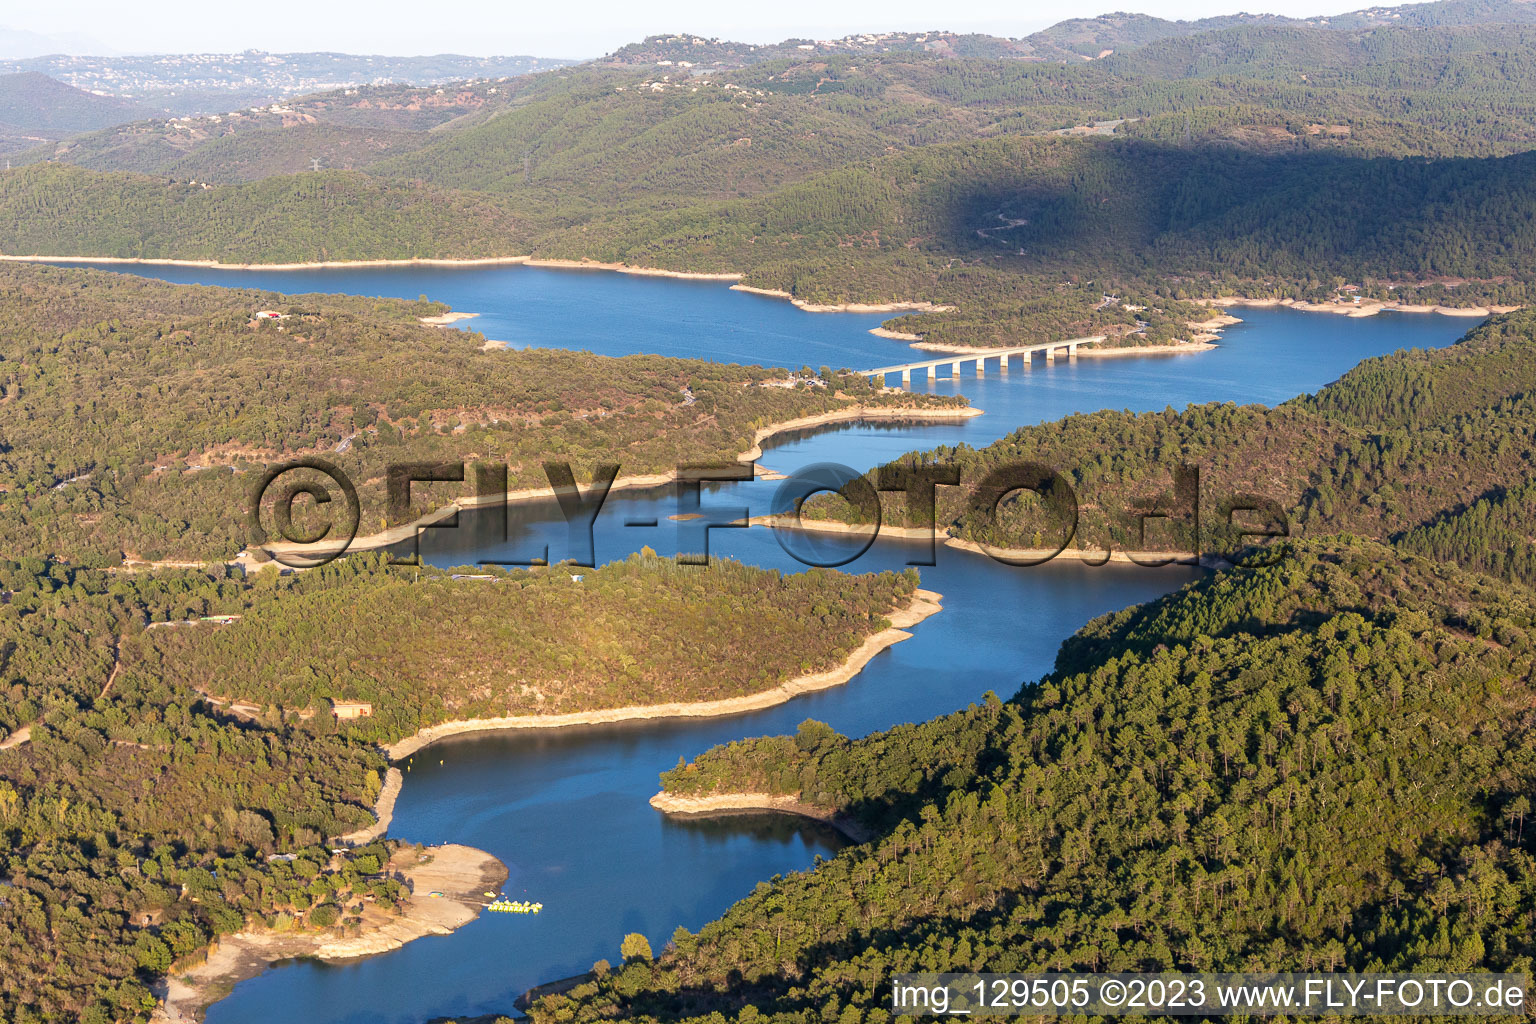 Impoundment and shore areas at the lake Lac de Saint cassien in Tanneron in Provence-Alpes-Cote d'Azur, France